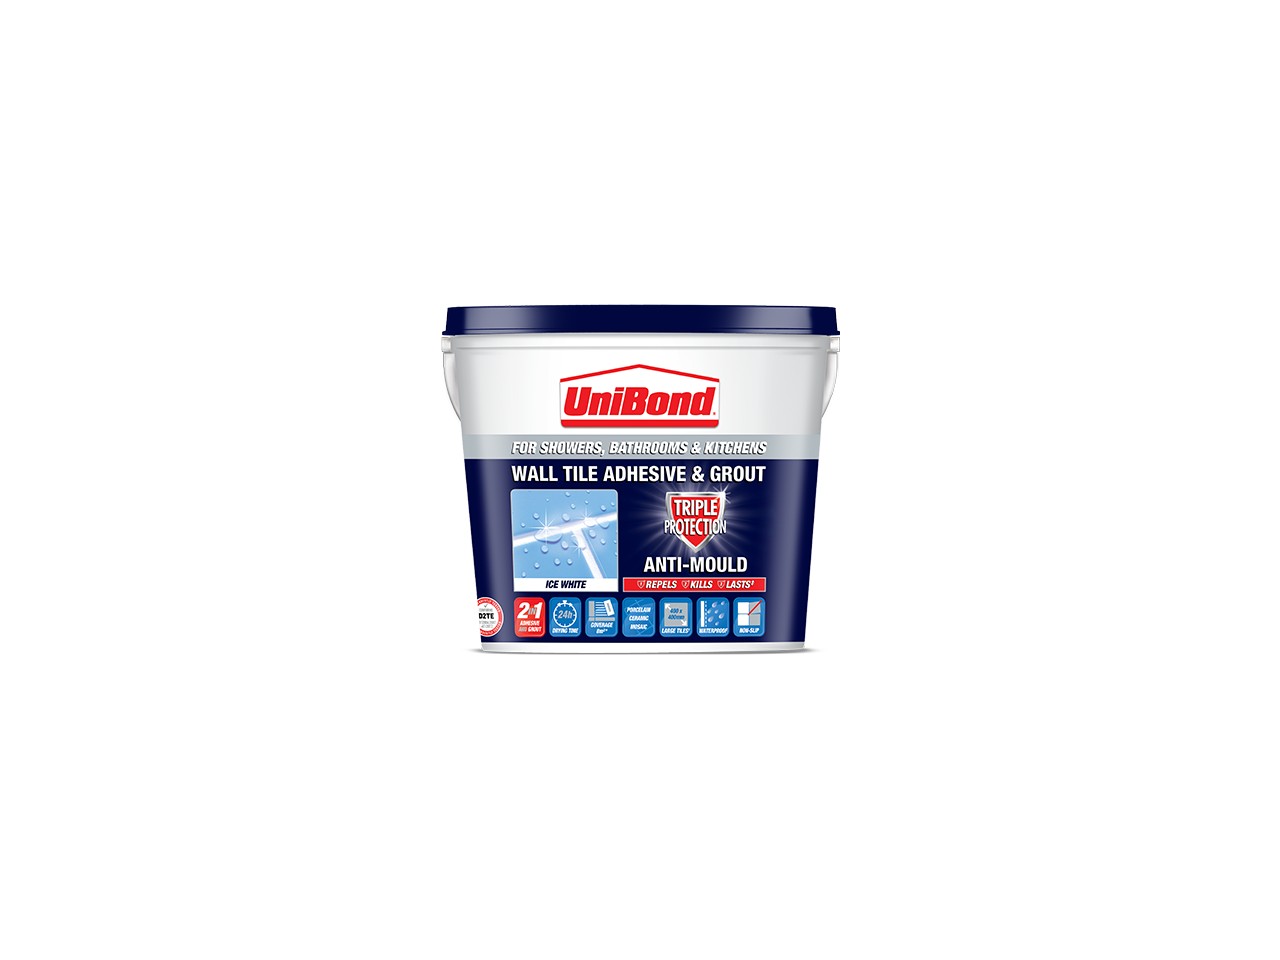 Wall Tile Adhesive Grout